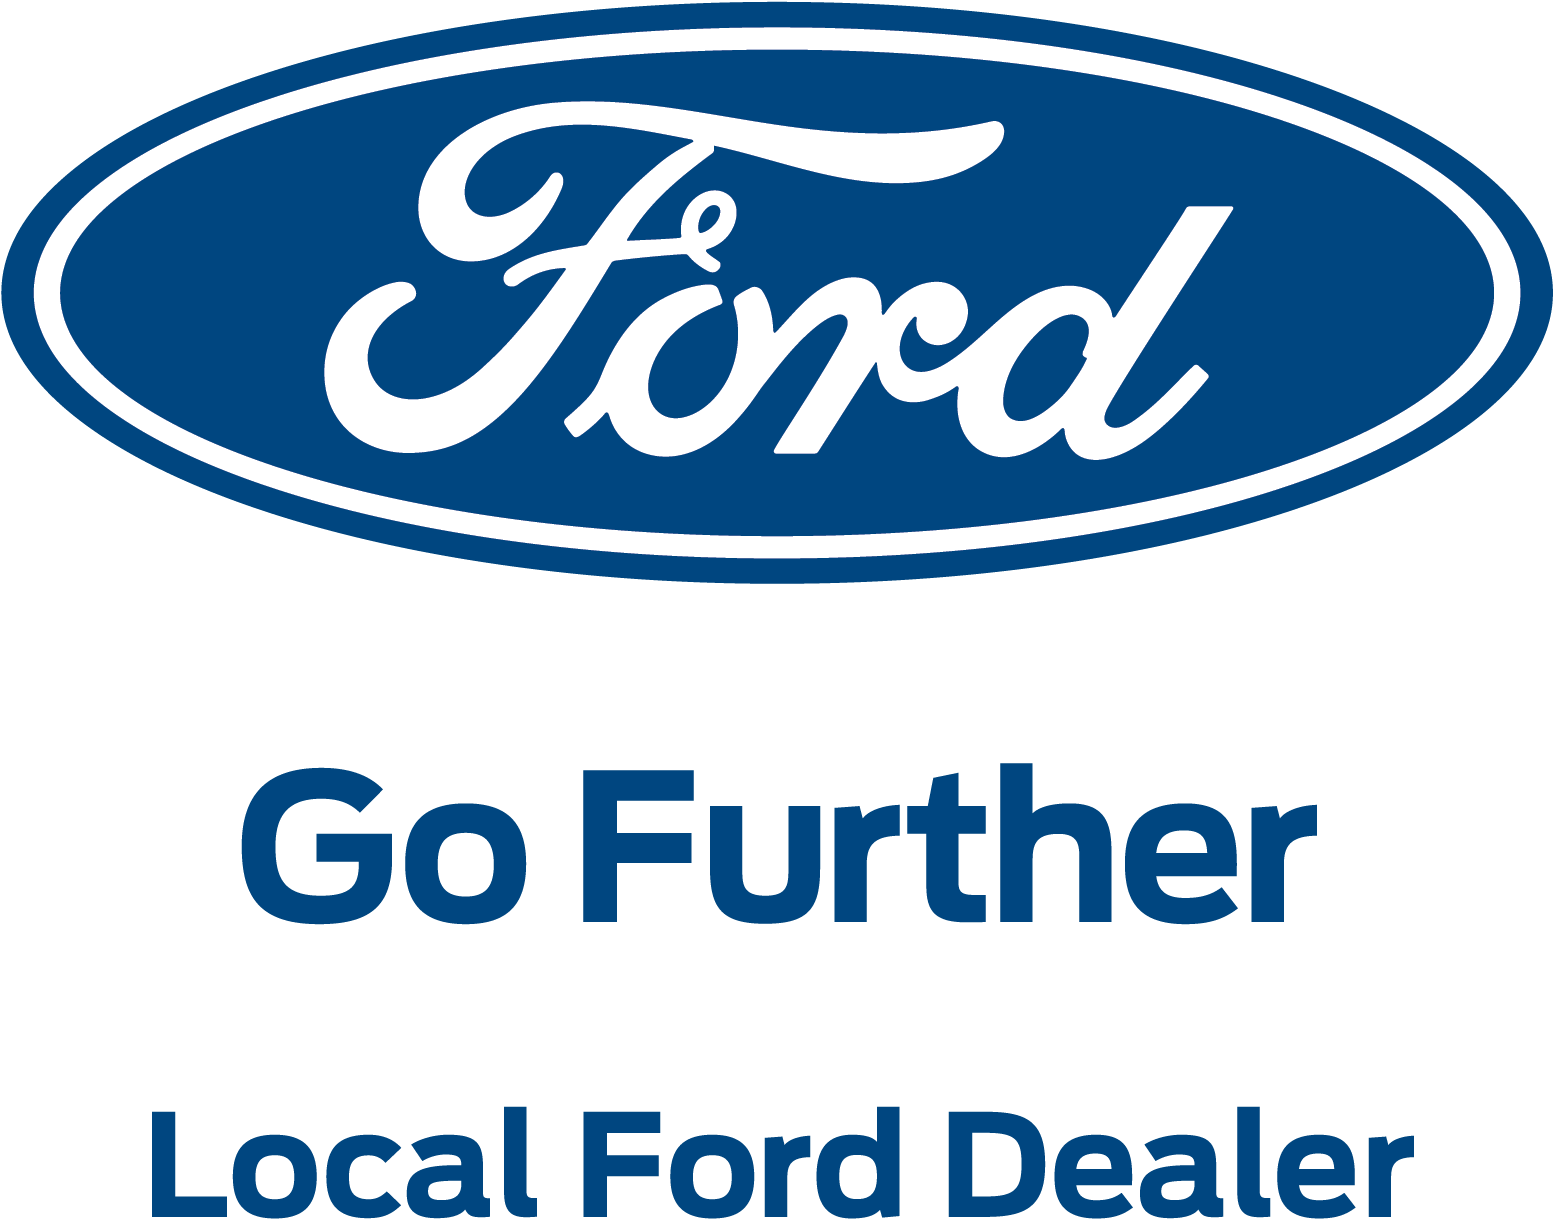 Image - Ford Clipart - Large Size Png Image - PikPng